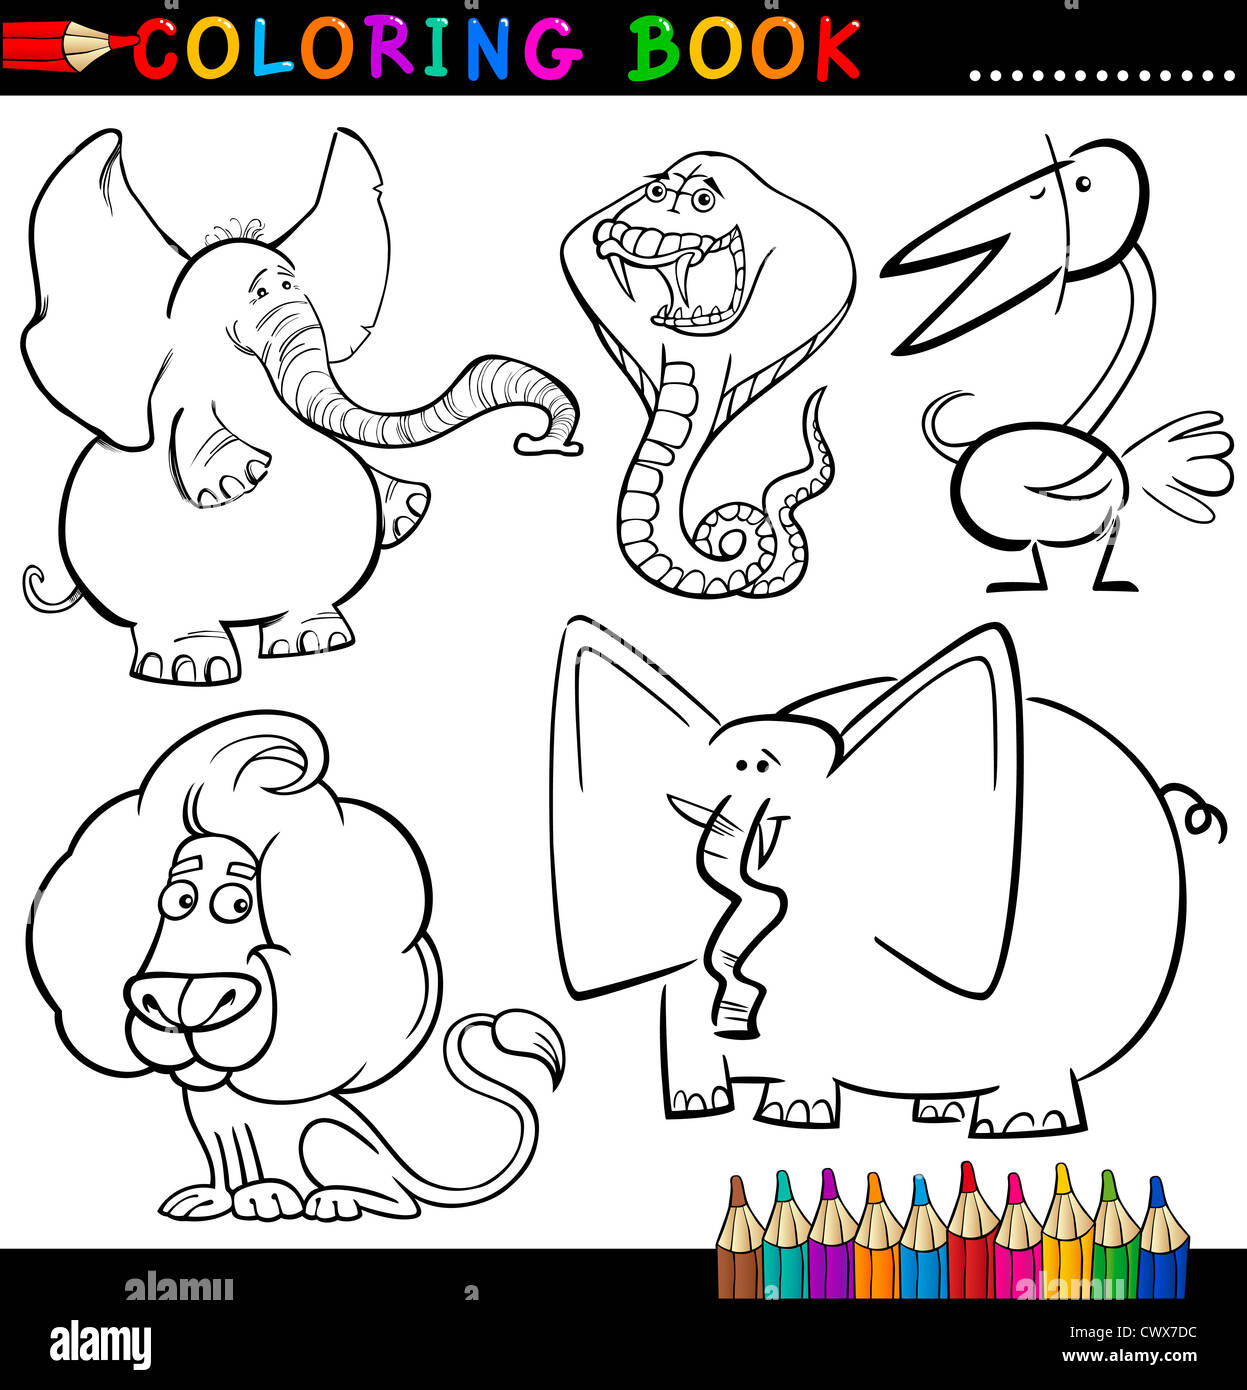 Coloring Book or Page Cartoon Illustration of Funny Wild and Safari Animals for Children Stock Photo